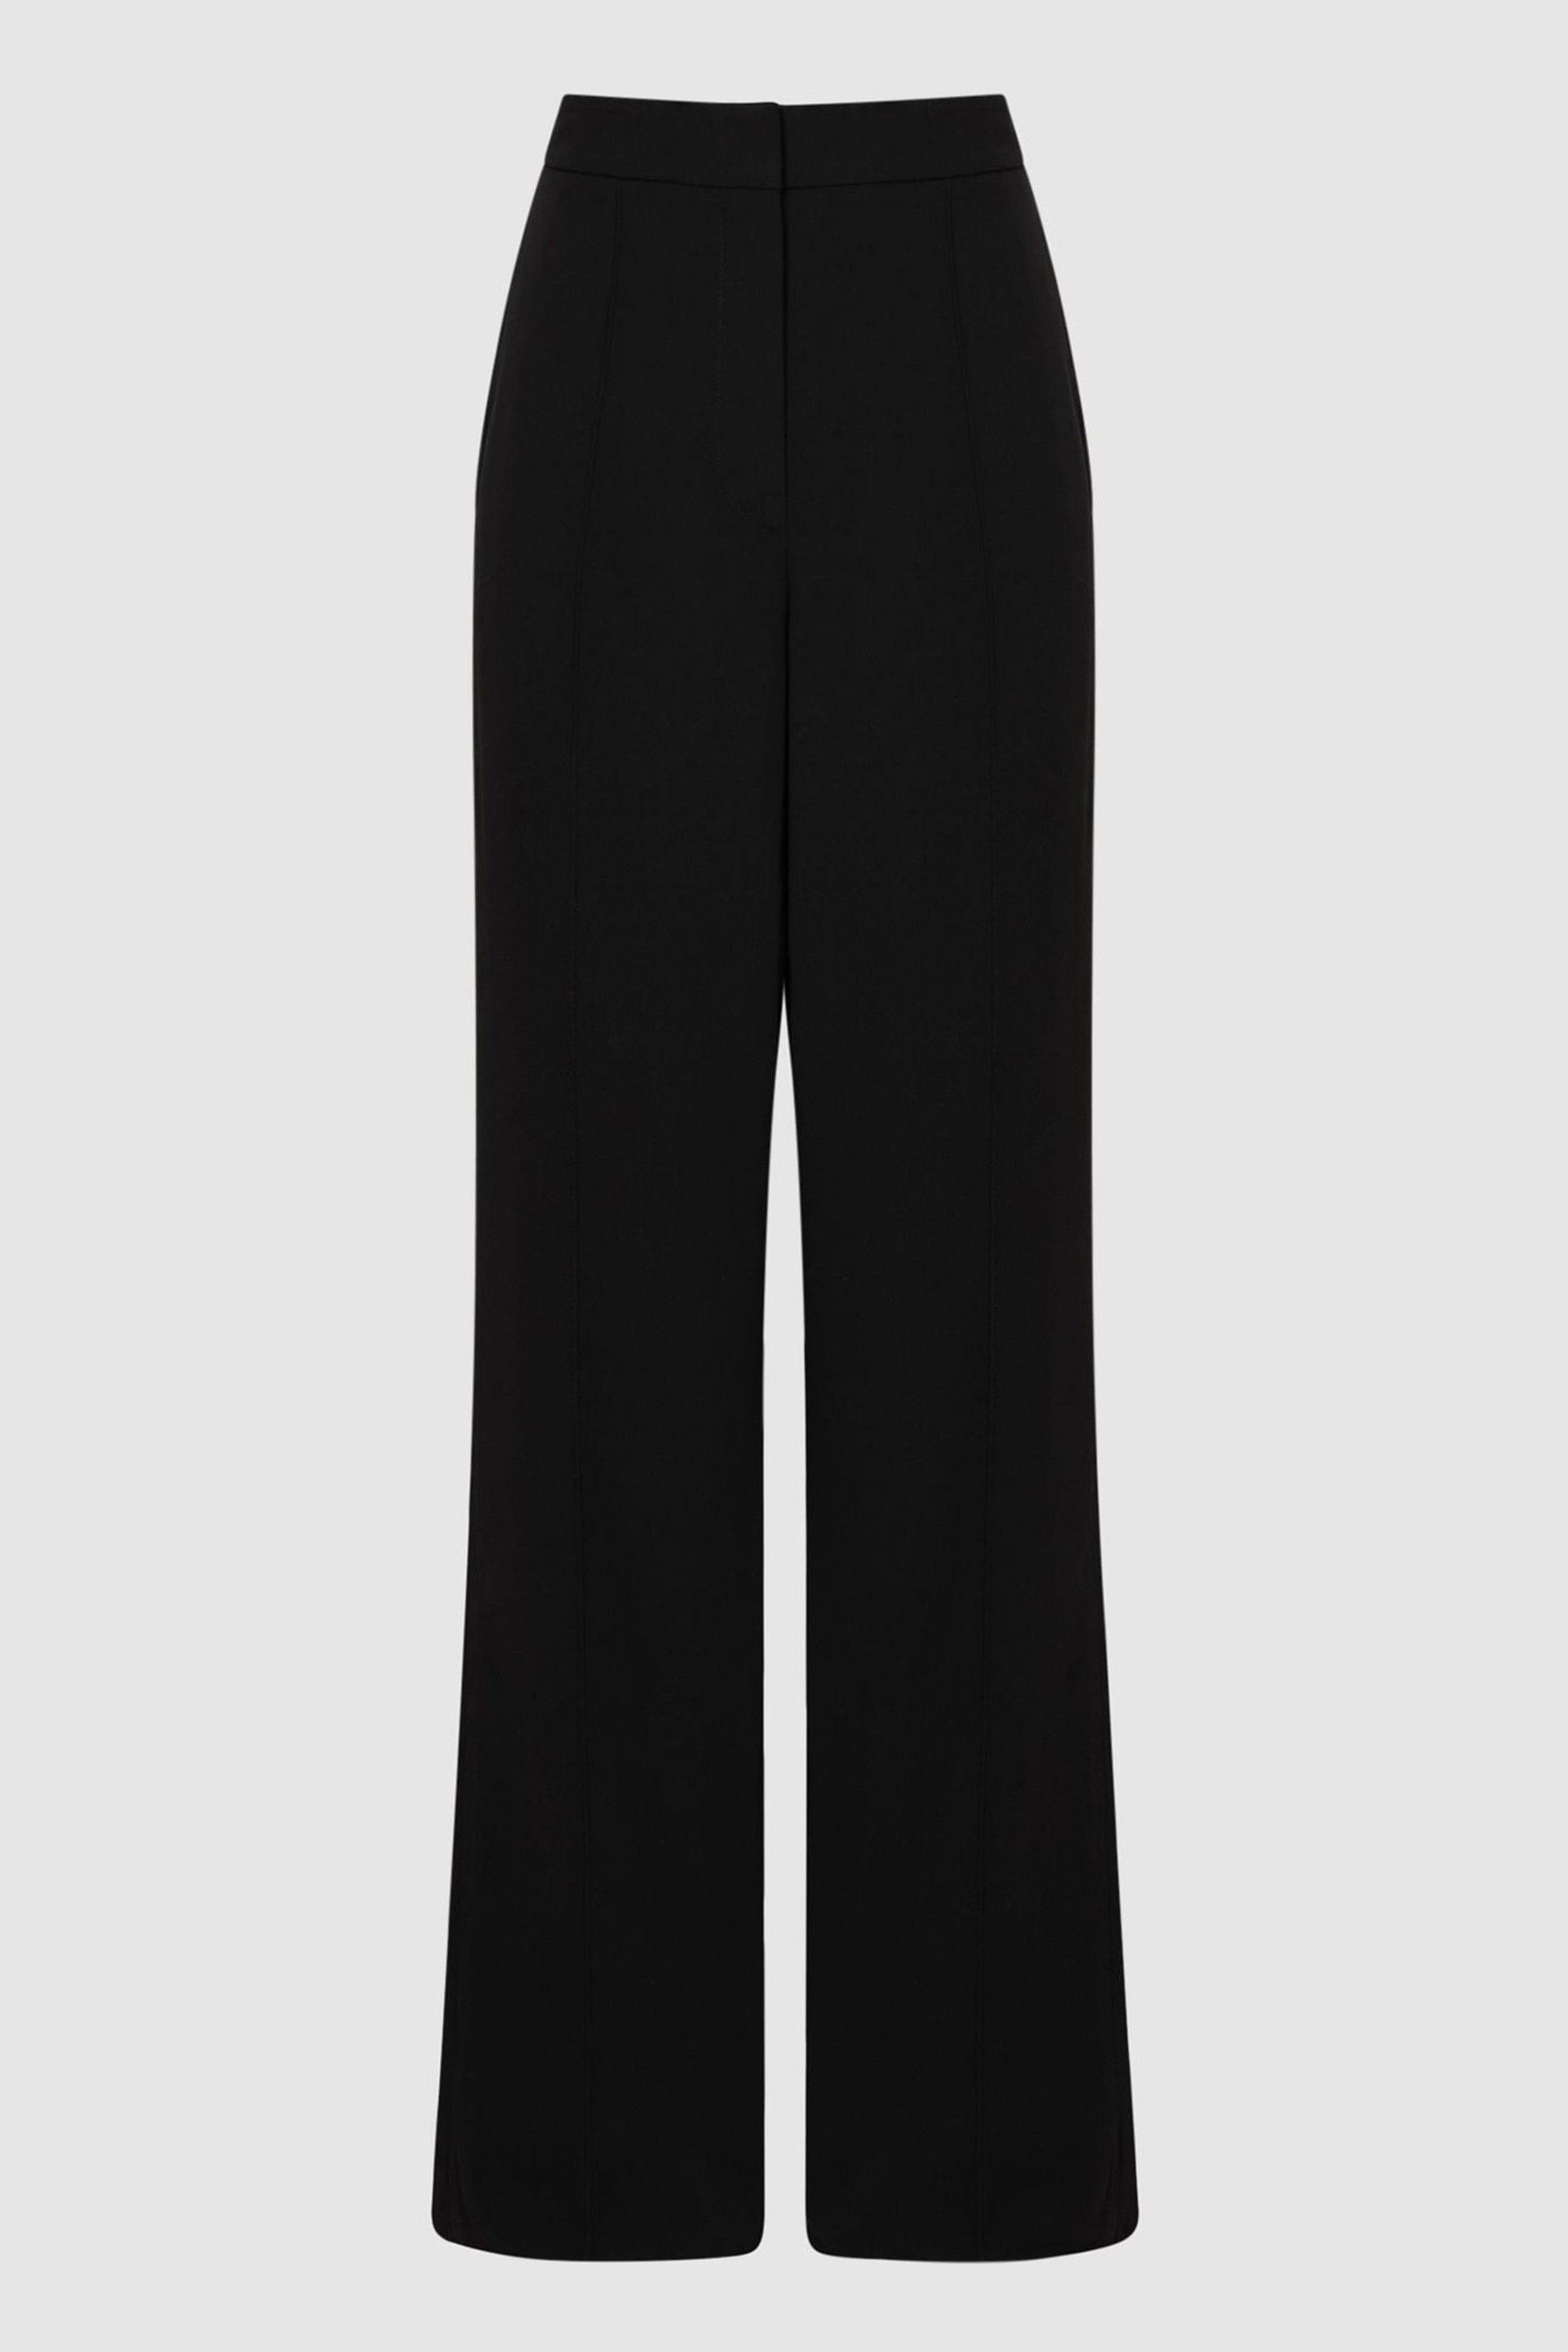 Buy Reiss Black Aleah Pull On Trousers from Next Ireland